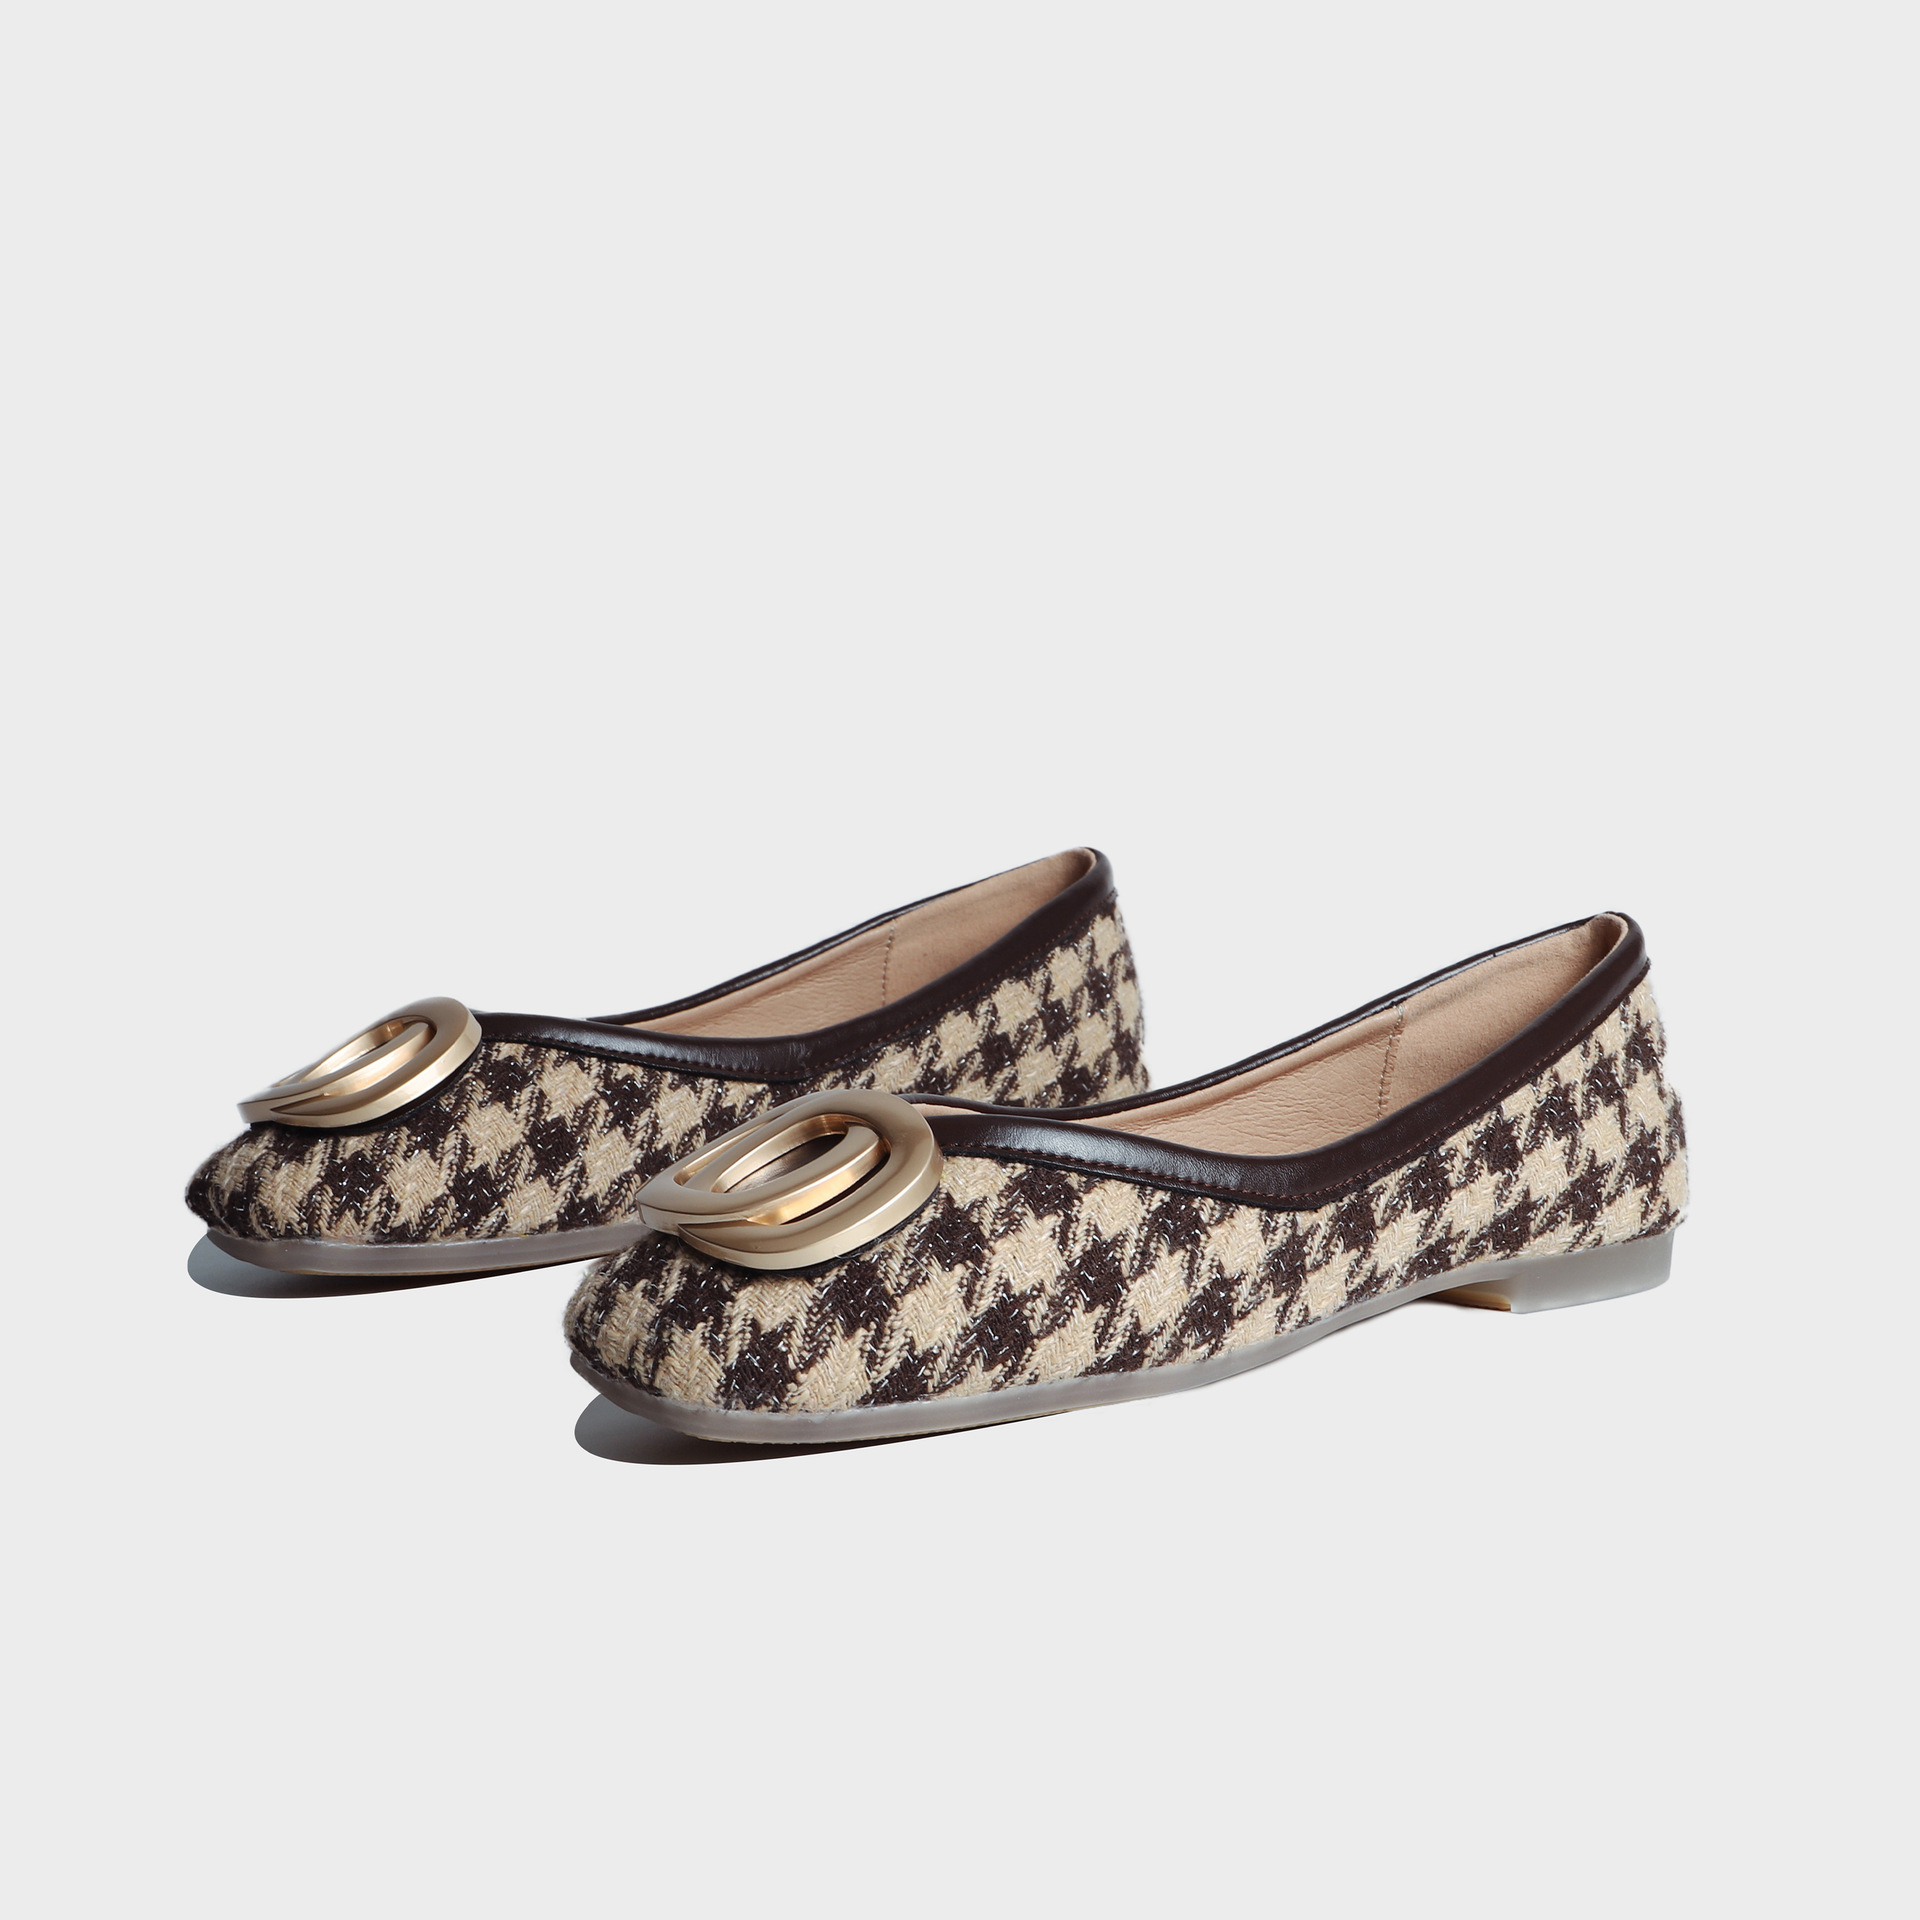 Fashionable and trendy for the style-conscious Flats Walk in style and comfort with flats